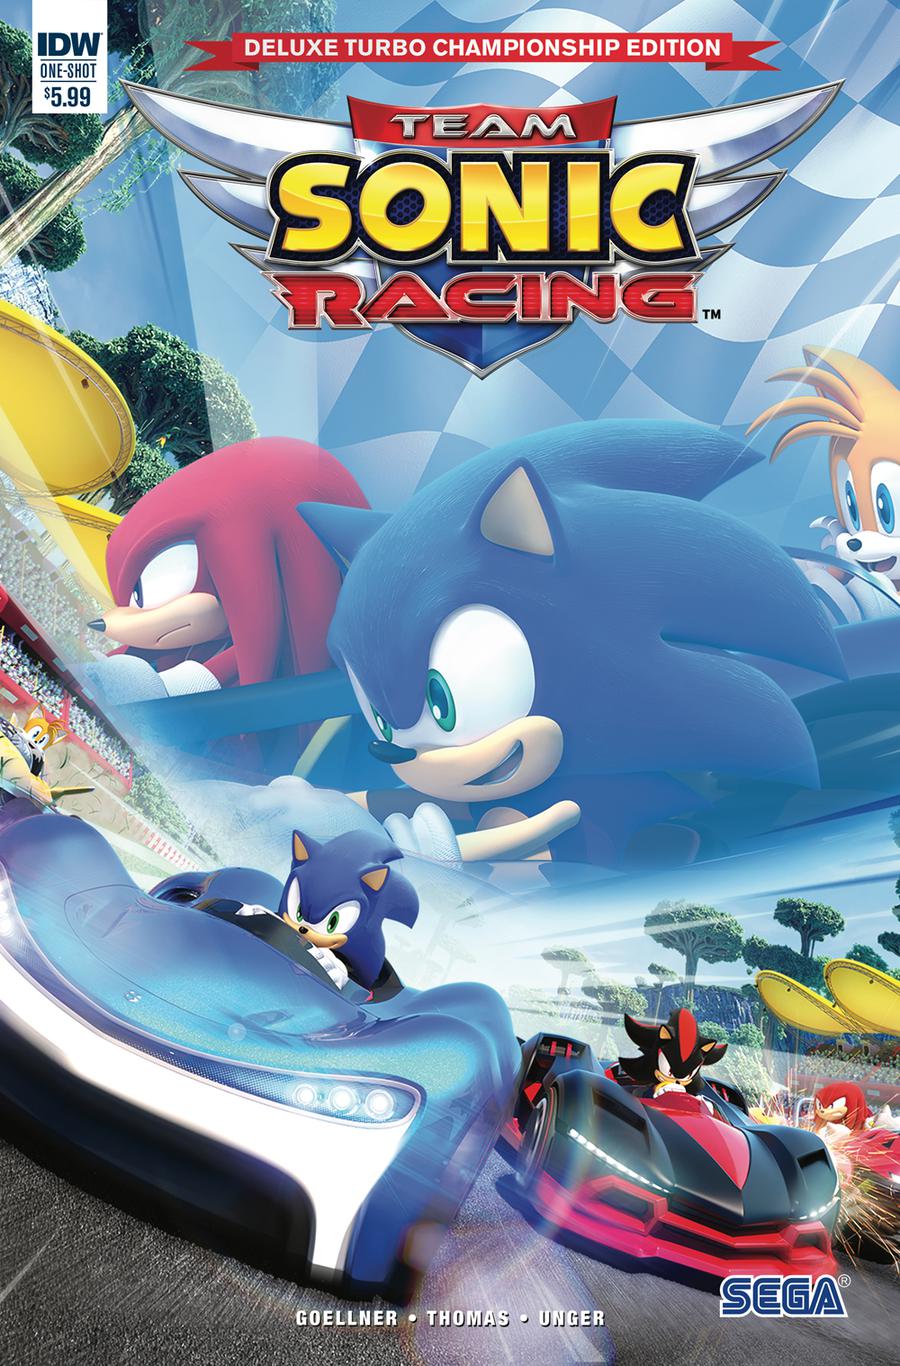 Team Sonic Racing Plus Deluxe Turbo Championship Edition One Shot